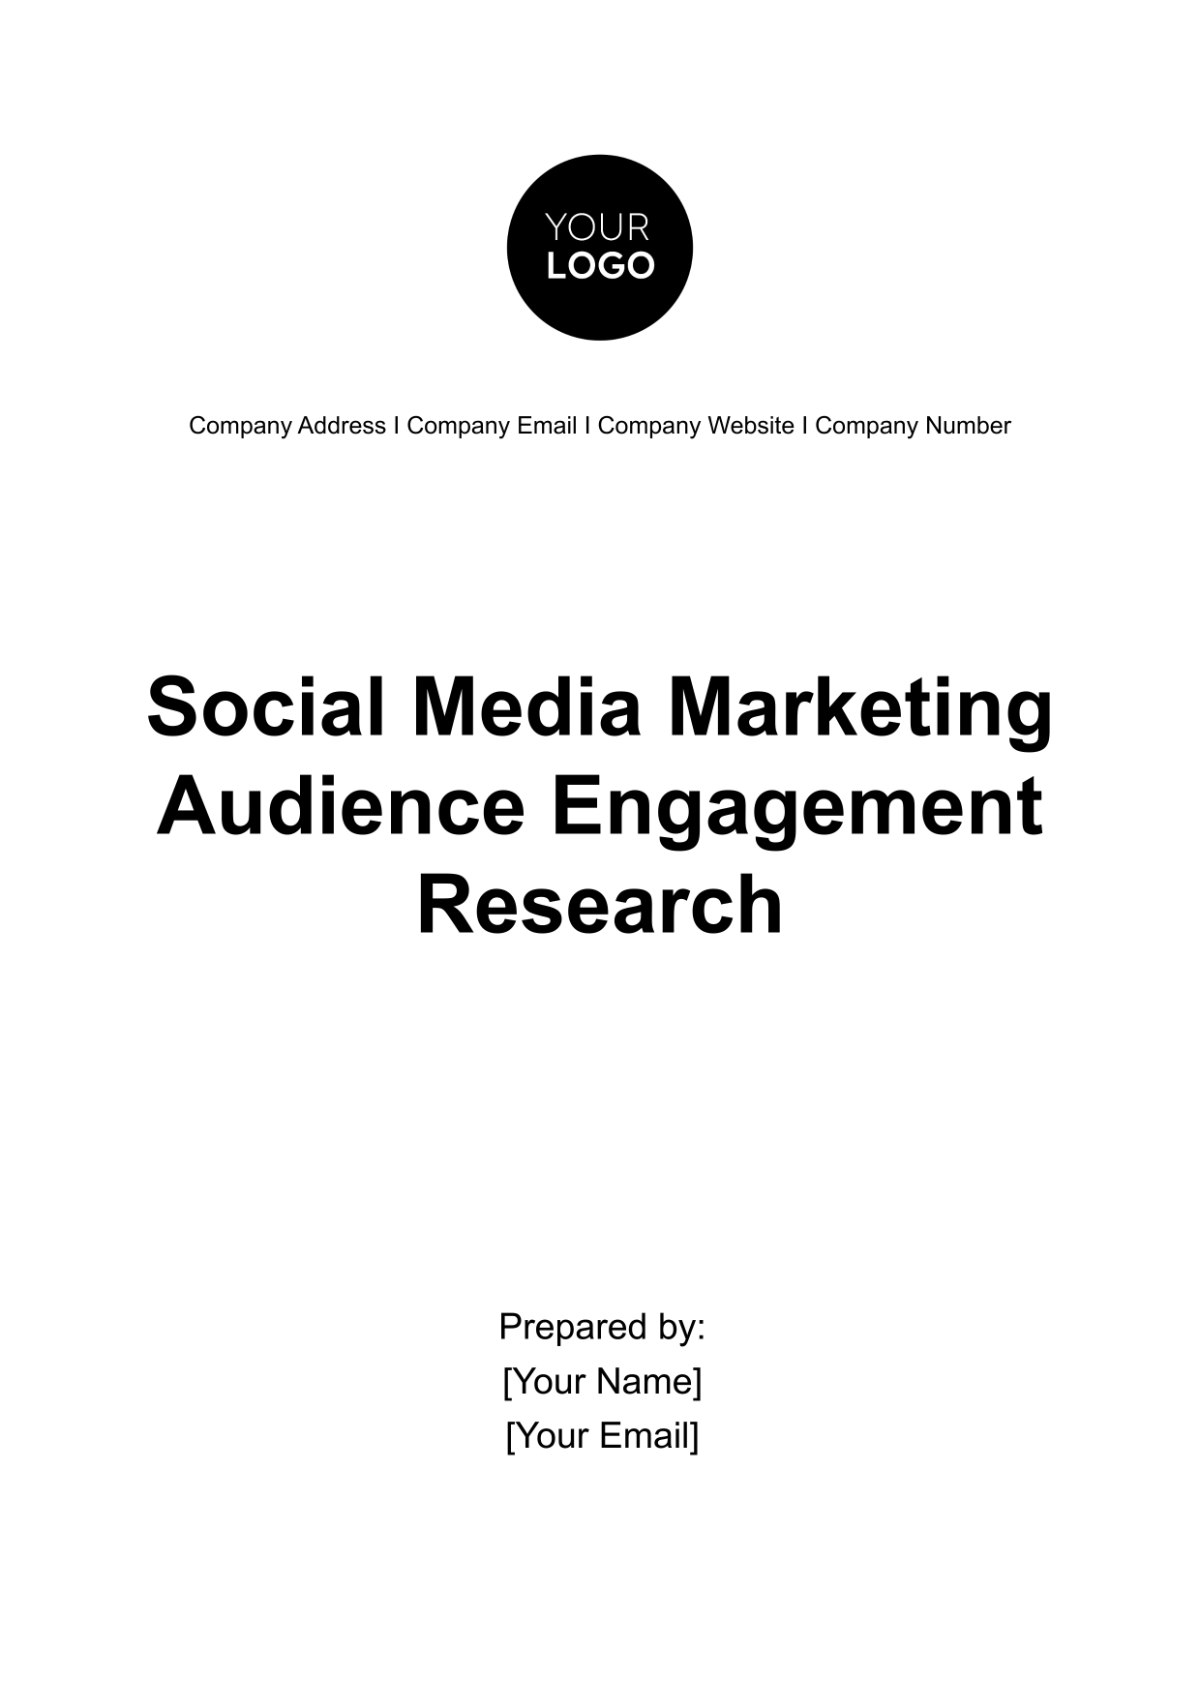 Social Media Marketing Audience Engagement Research Template